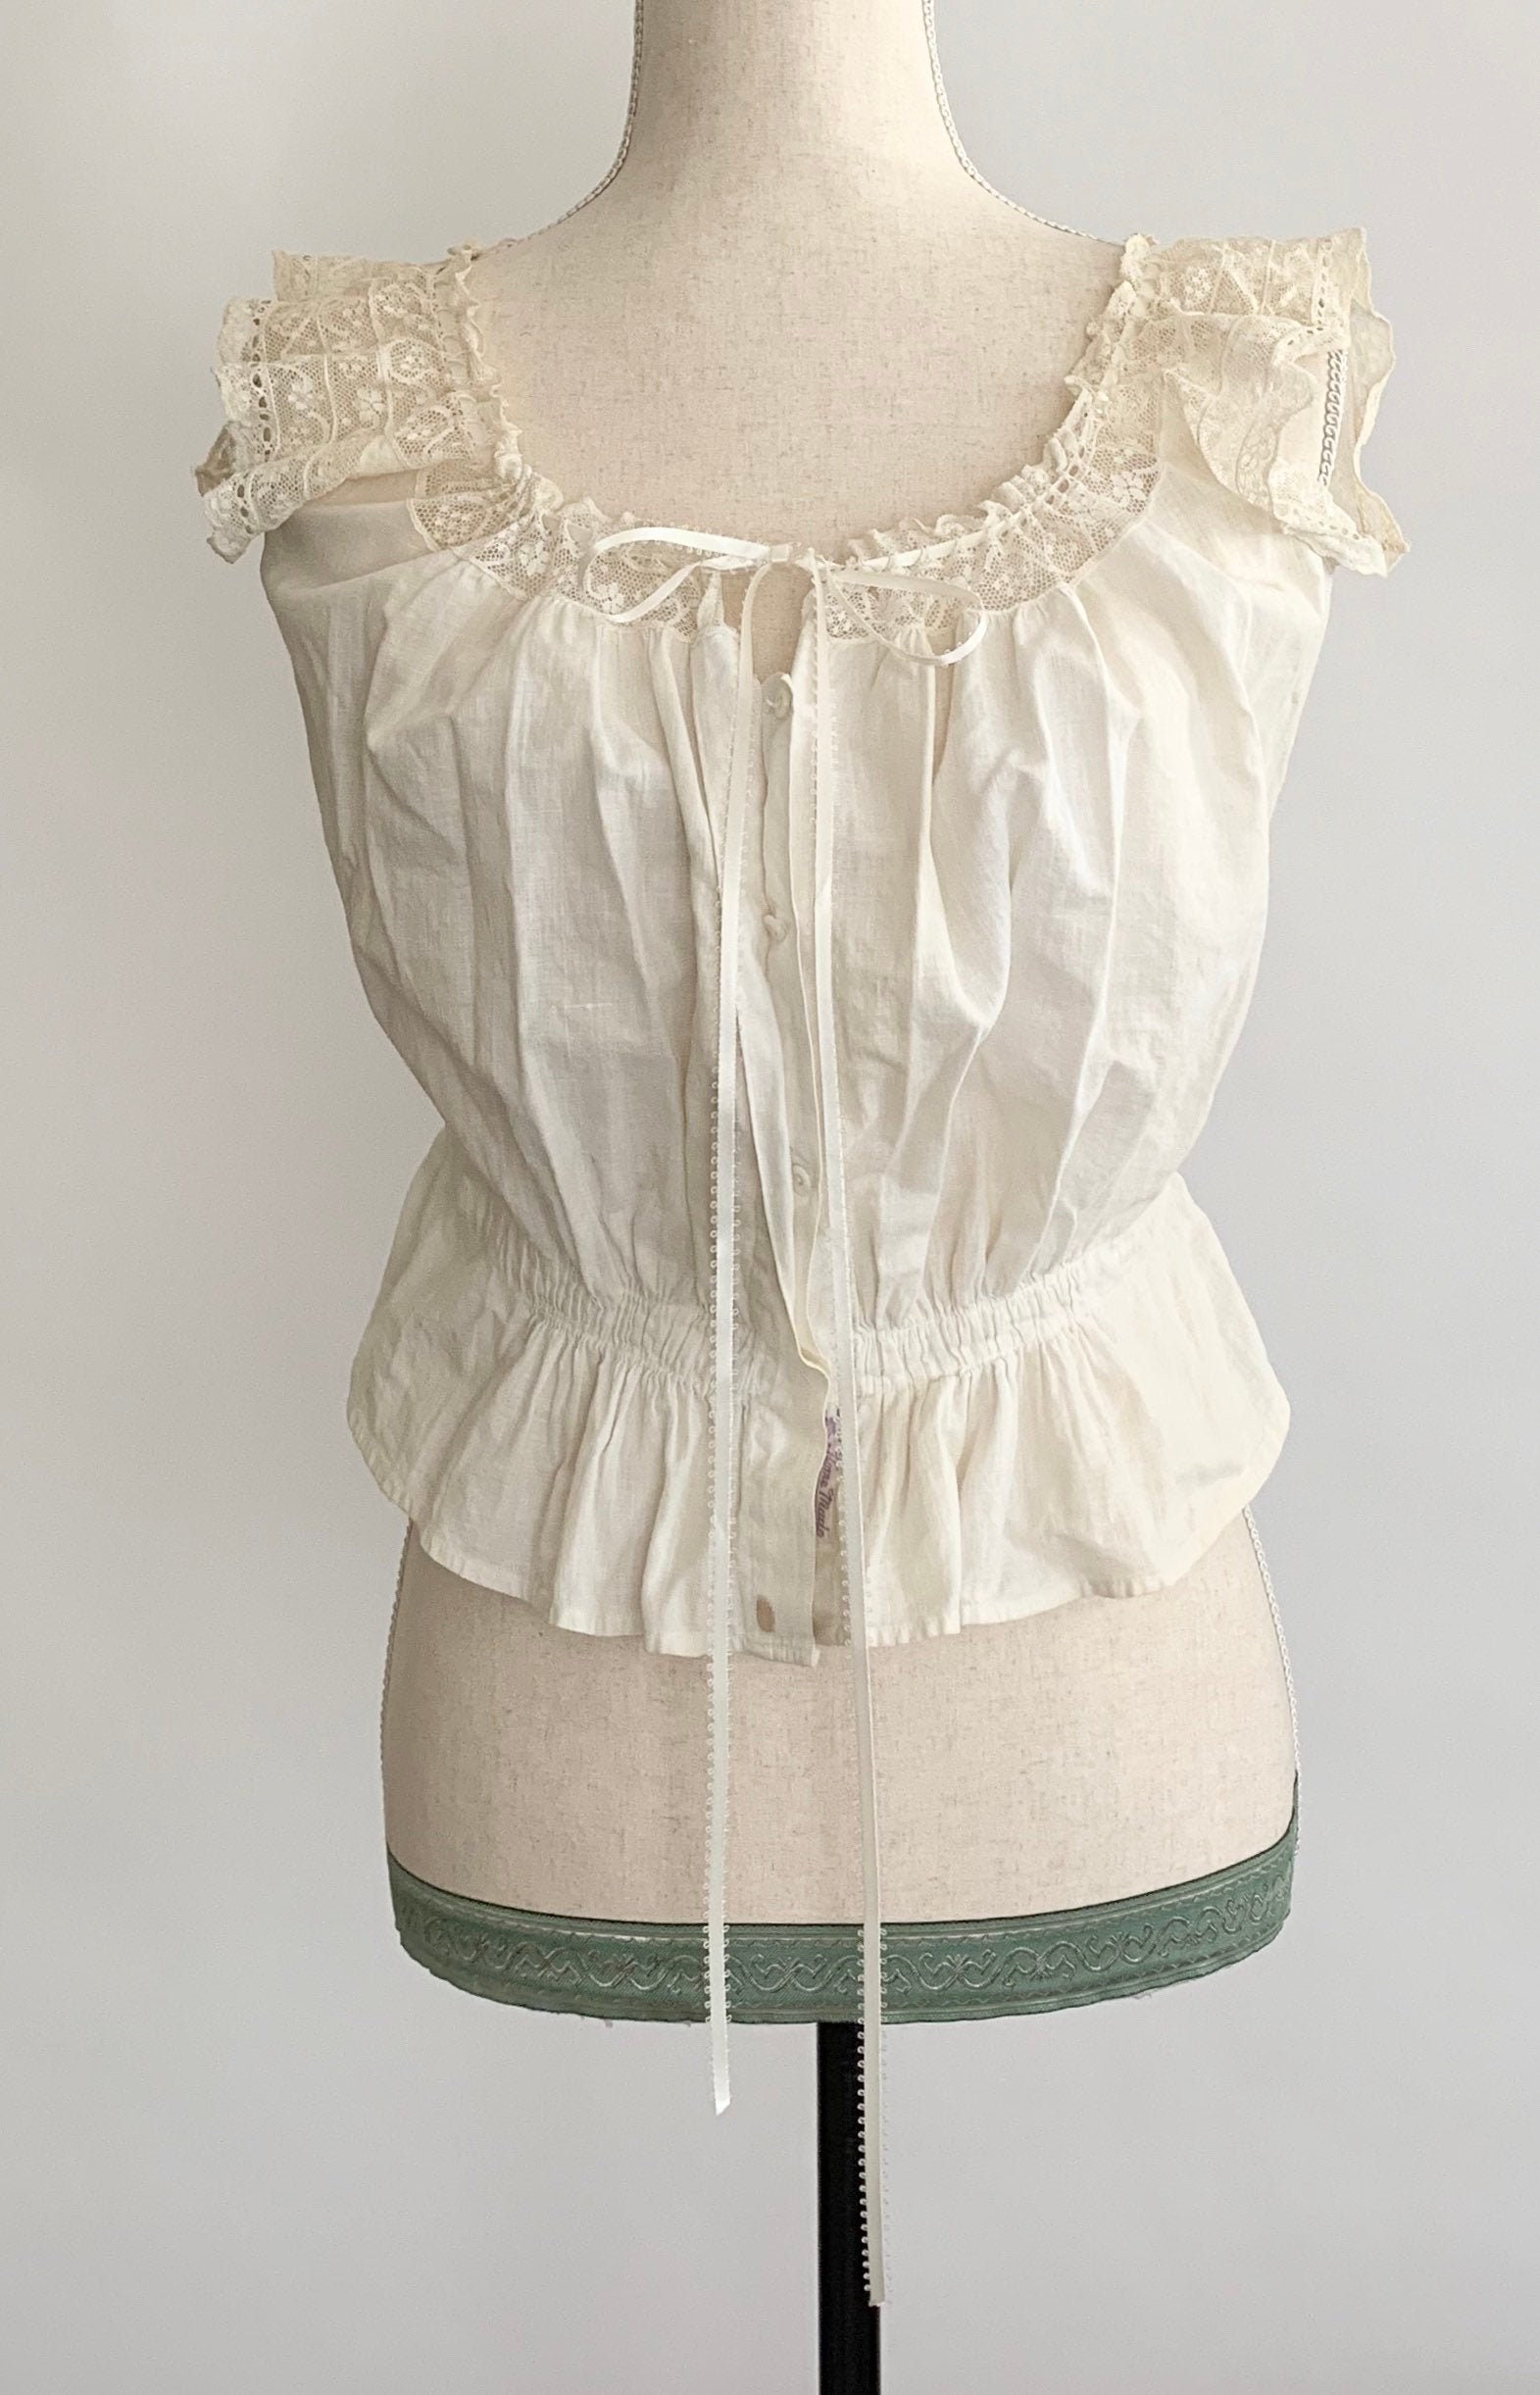 Antique Victorian Corset Cover Sleeveless Top Blouse Handmade Vintage  Costume Natural White Cotton Lace Button Front XS